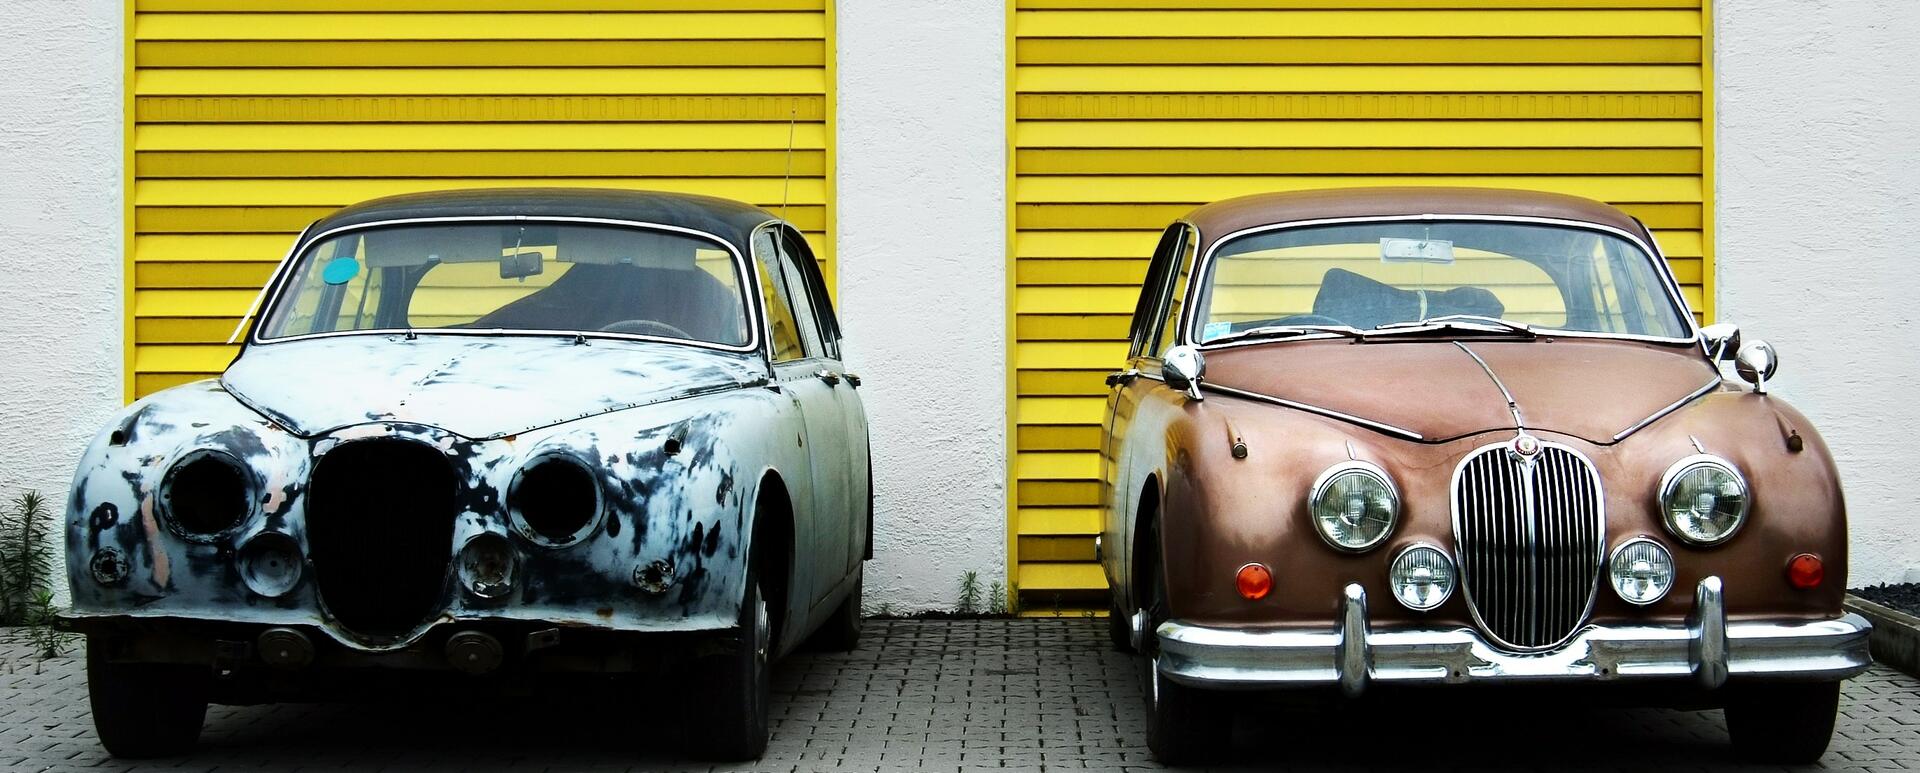 Just like those two cars, custom CMS might be similar to Drupal from the outside, but whole difference is in the inside